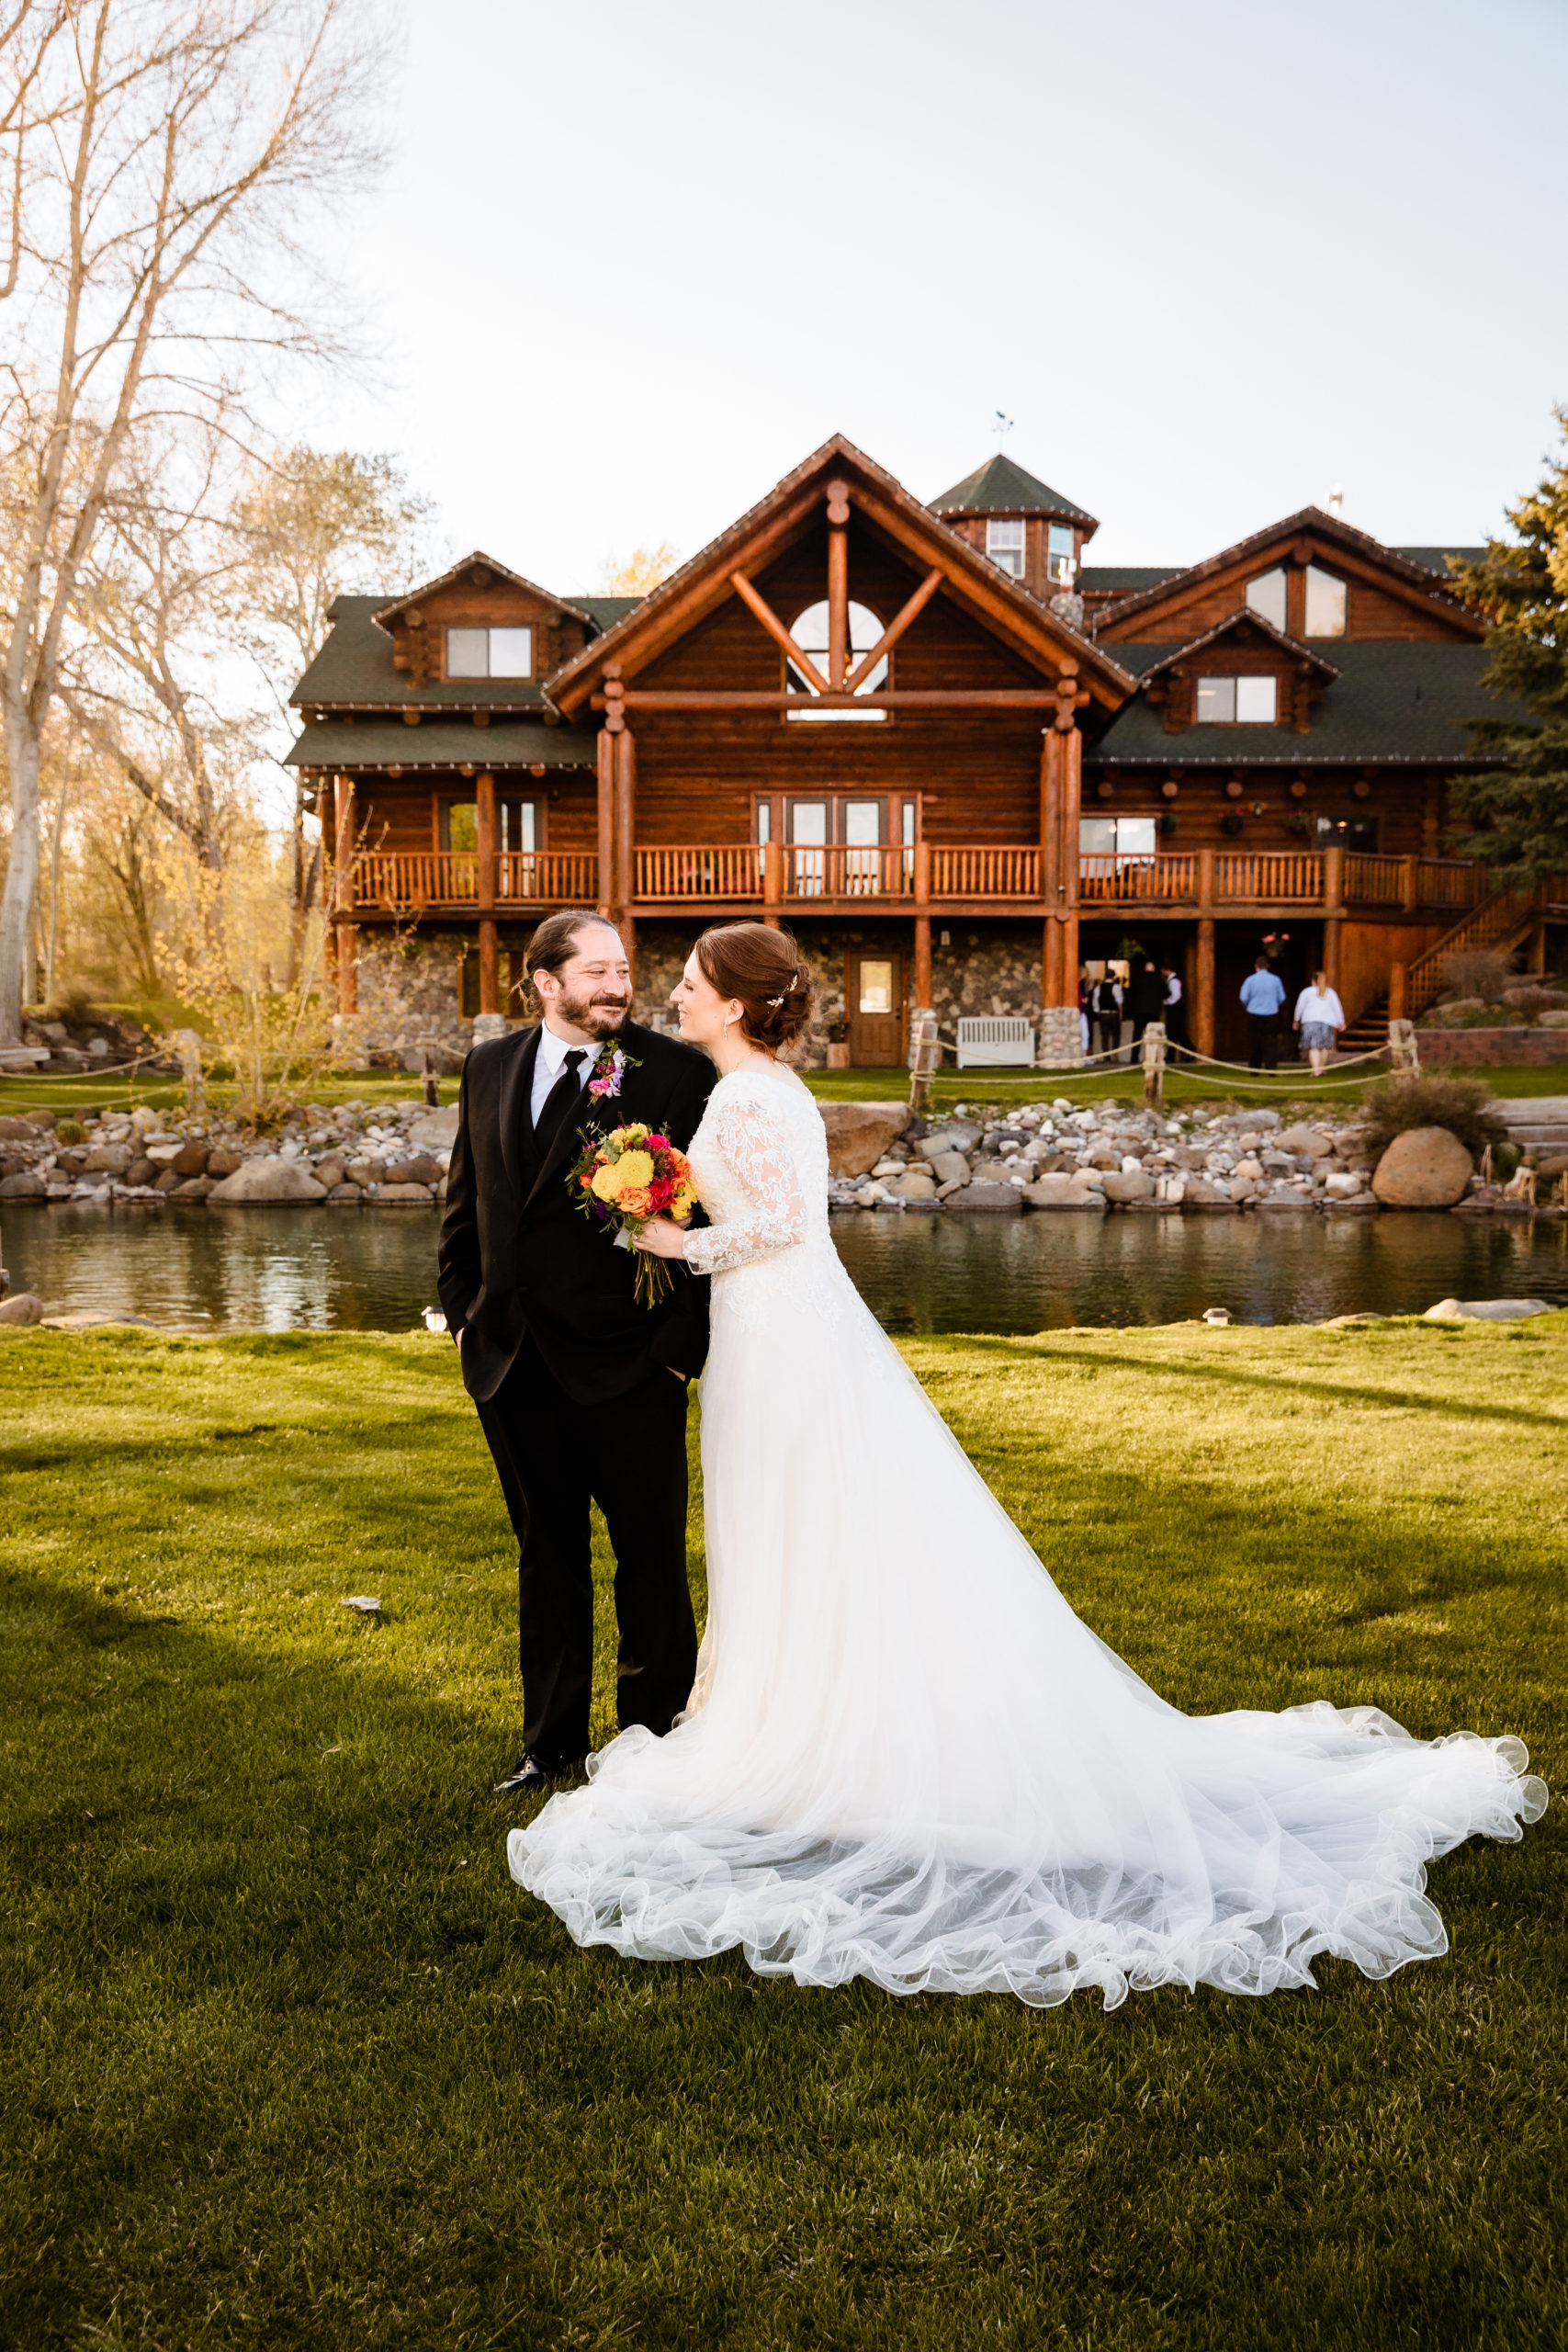 Labelle Lake wedding venue cabin and small lake behind bride and groom as they pose for their wedding portraits